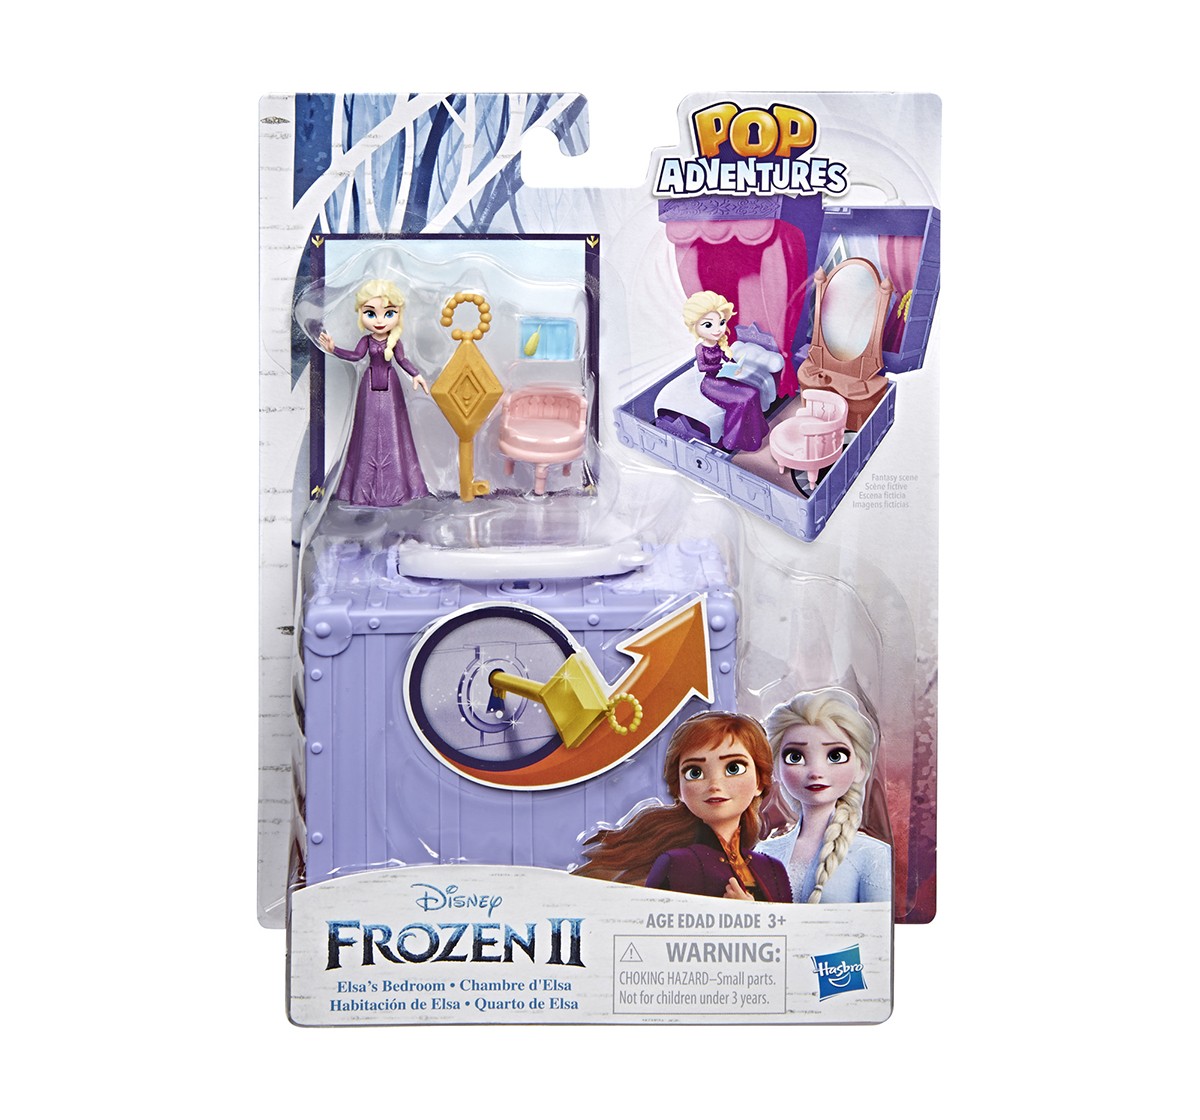 Disney Frozen 2 Pop-Up Playset - Assorted Dolls & Accessories for age 3Y+ 